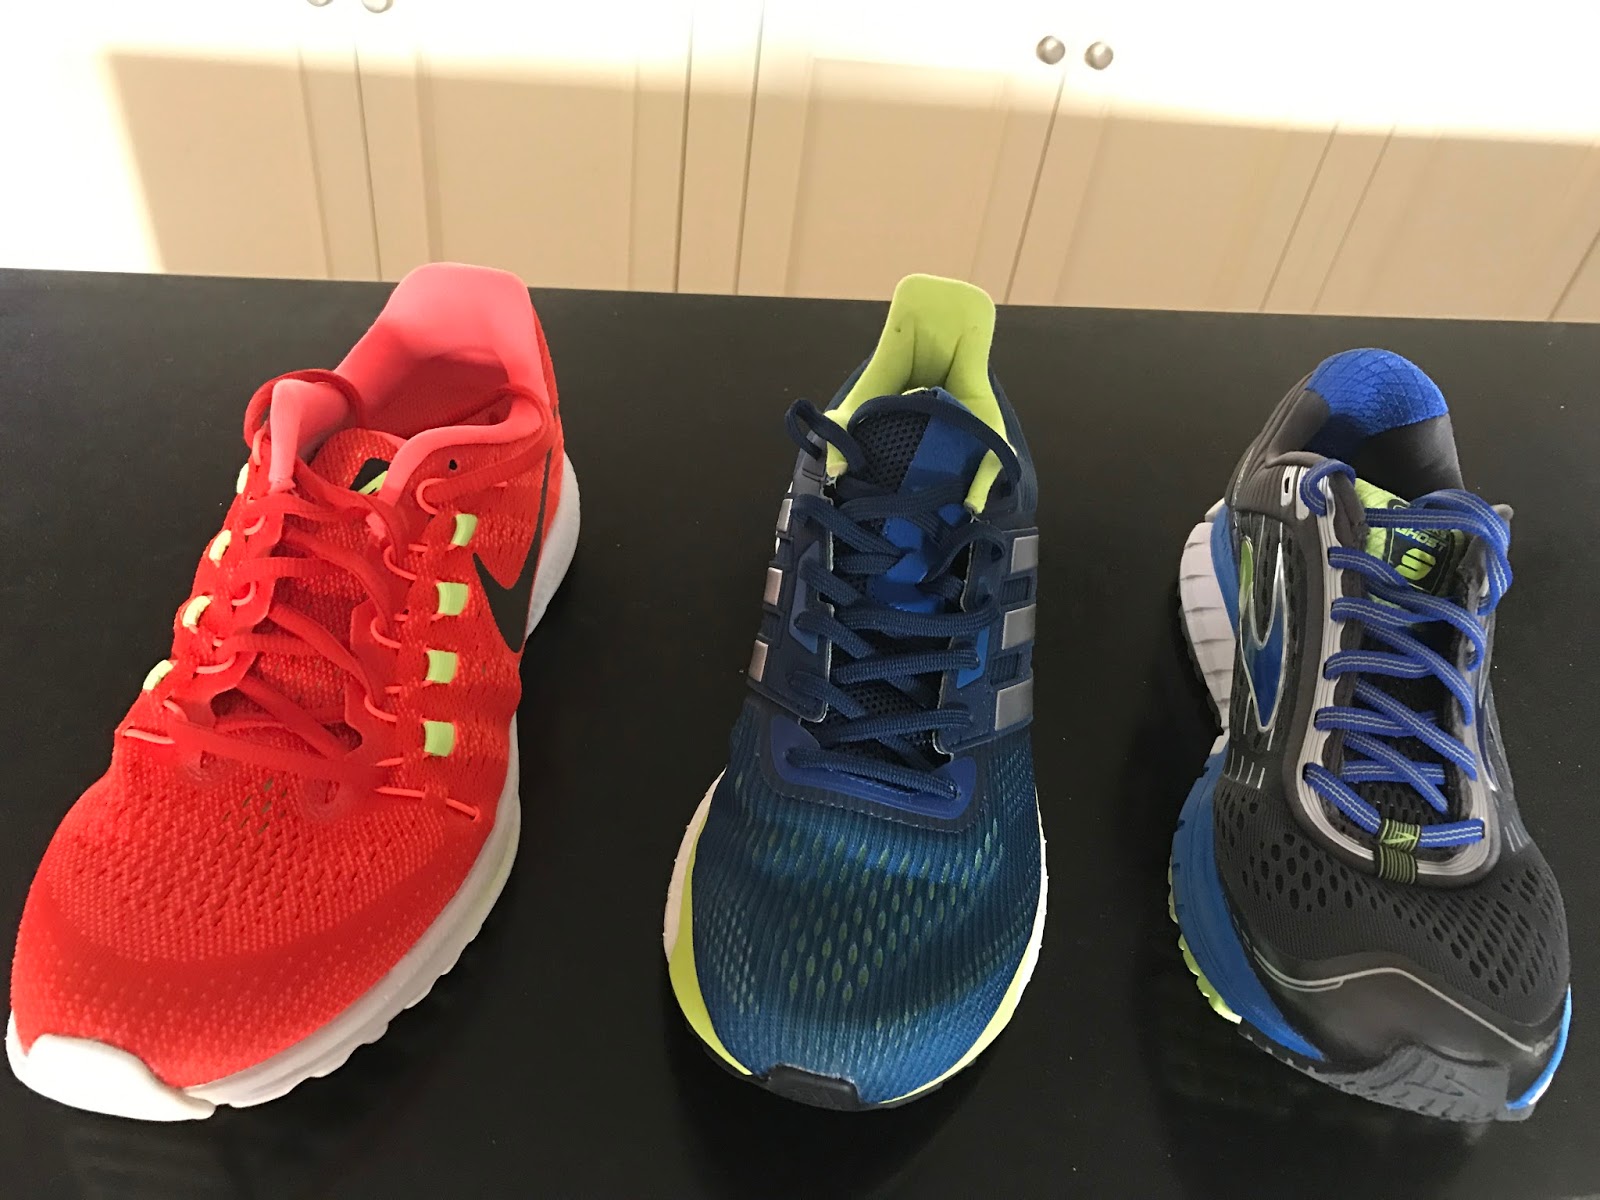 Vuelo Melodioso resbalón Road Trail Run: Reviews and Comparisons: Nike Zoom Vomero 12, Brooks Ghost  9, and adidas Supernova Glide 9